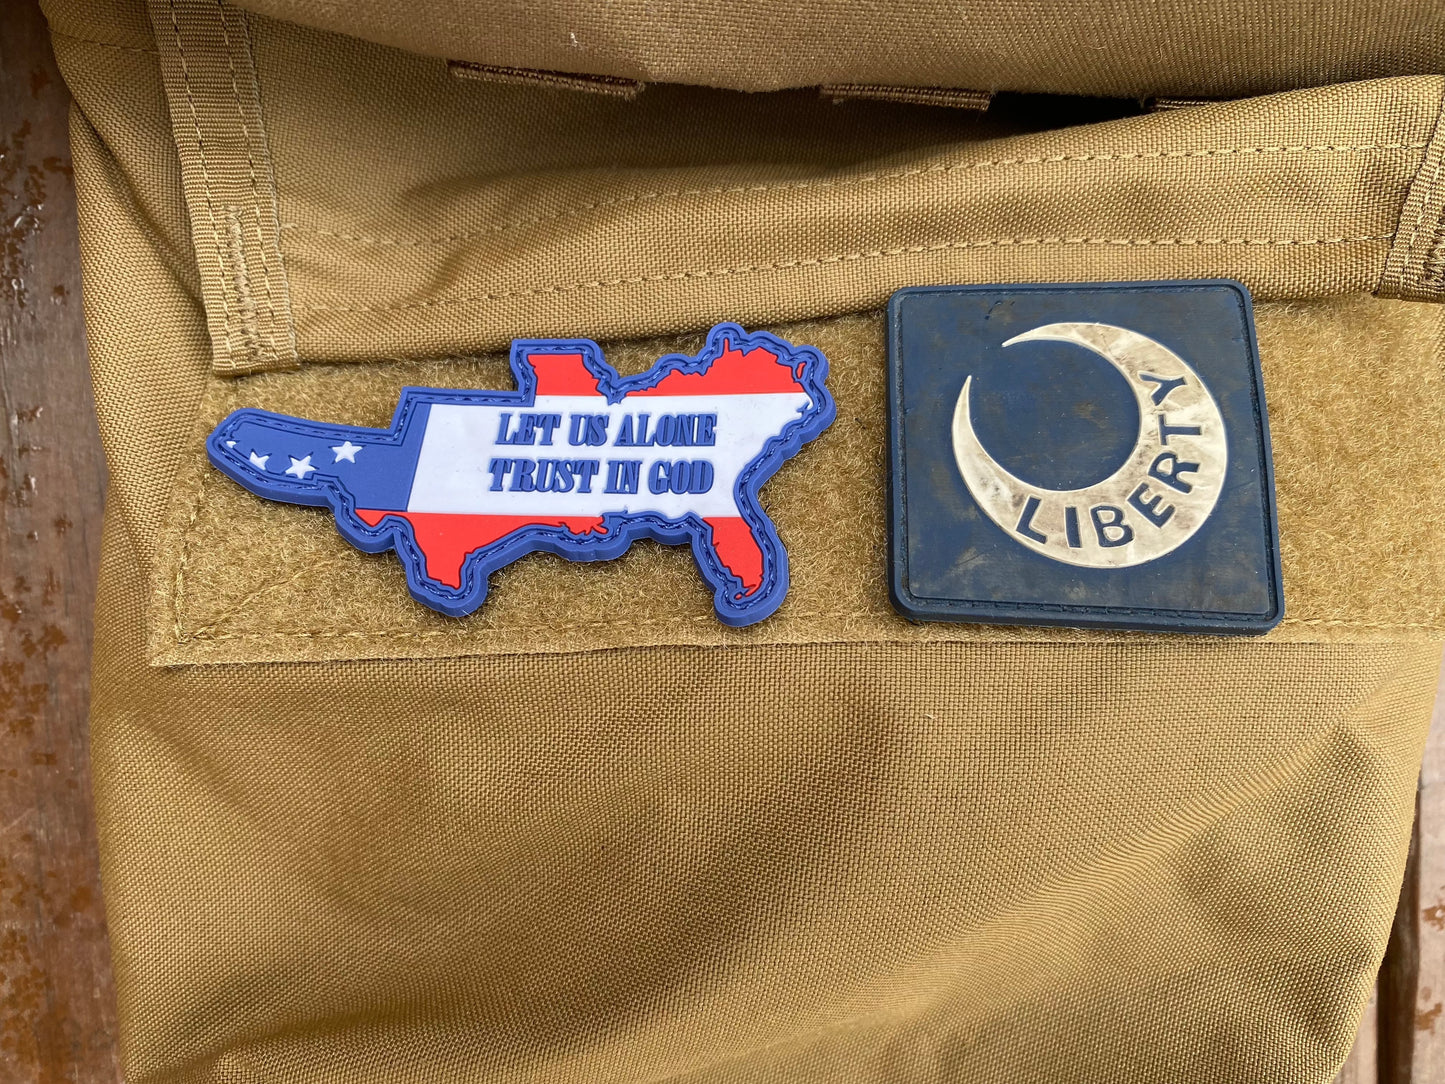 "Let us alone - Trust in God" PVC Morale Patch